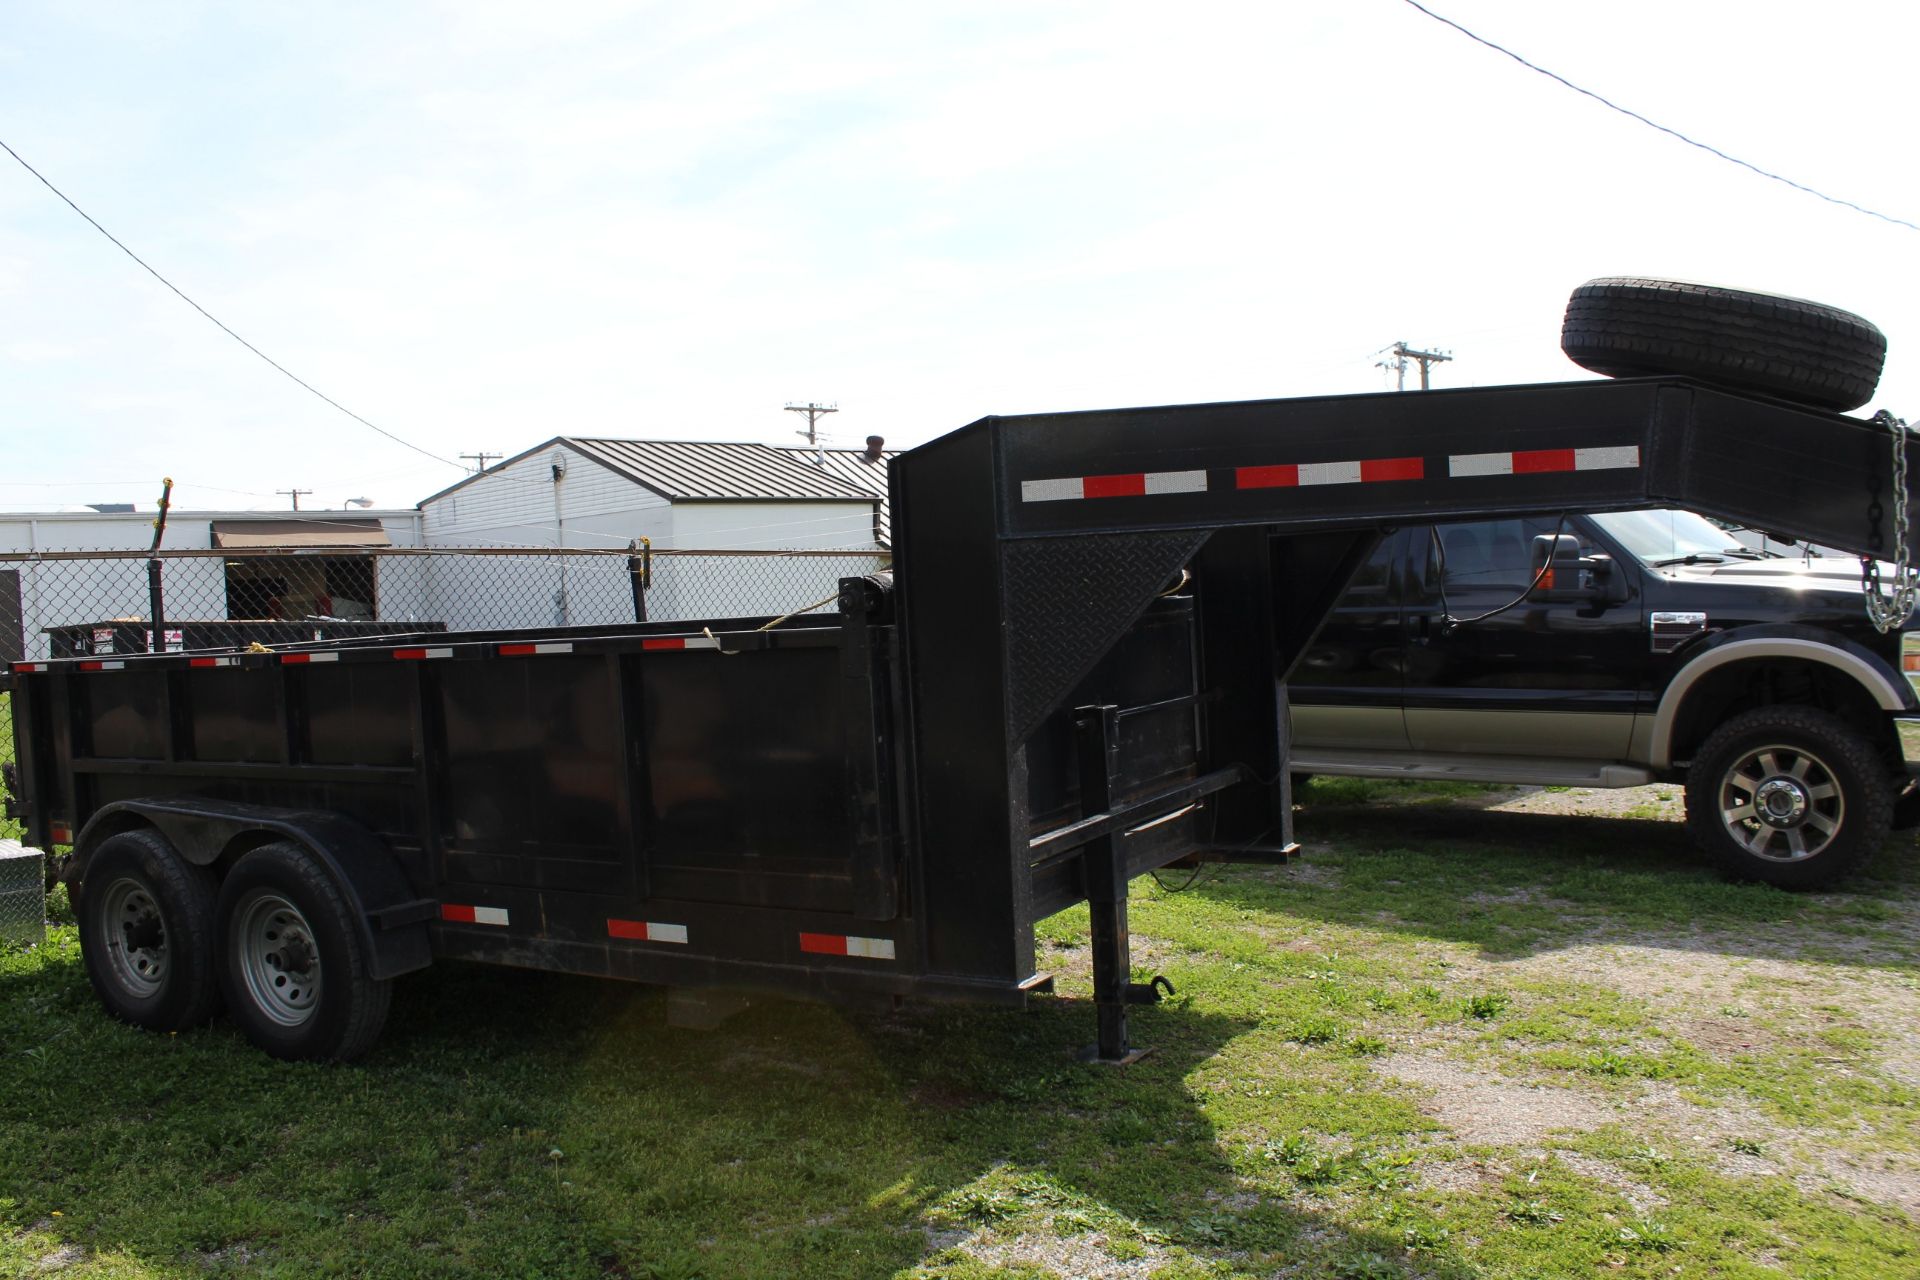 2017 Baggetts Hydraulic Gooseneck Dump Trailer, 7 ft x 14 ft, 14,000lb GBWR, No Title Ever - Image 2 of 3